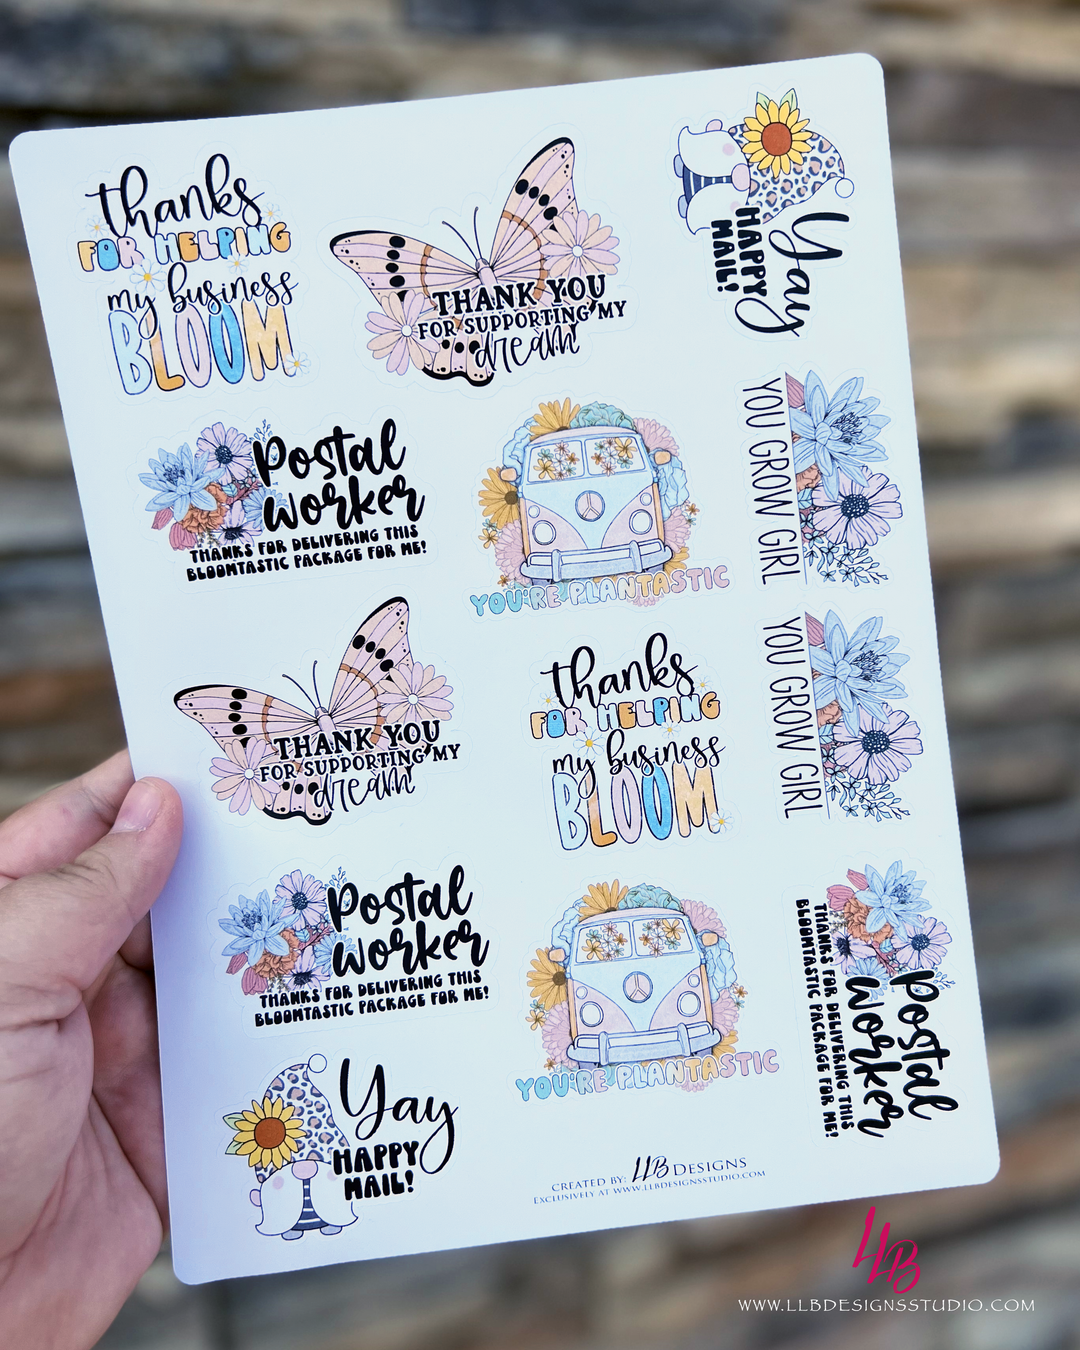 Mix Sticker Sheet - Spread Kindness Like Wildflowers |  Packaging Stickers | Business Branding | Small Shop Stickers | Sticker #: S0422 | Ready To Ship